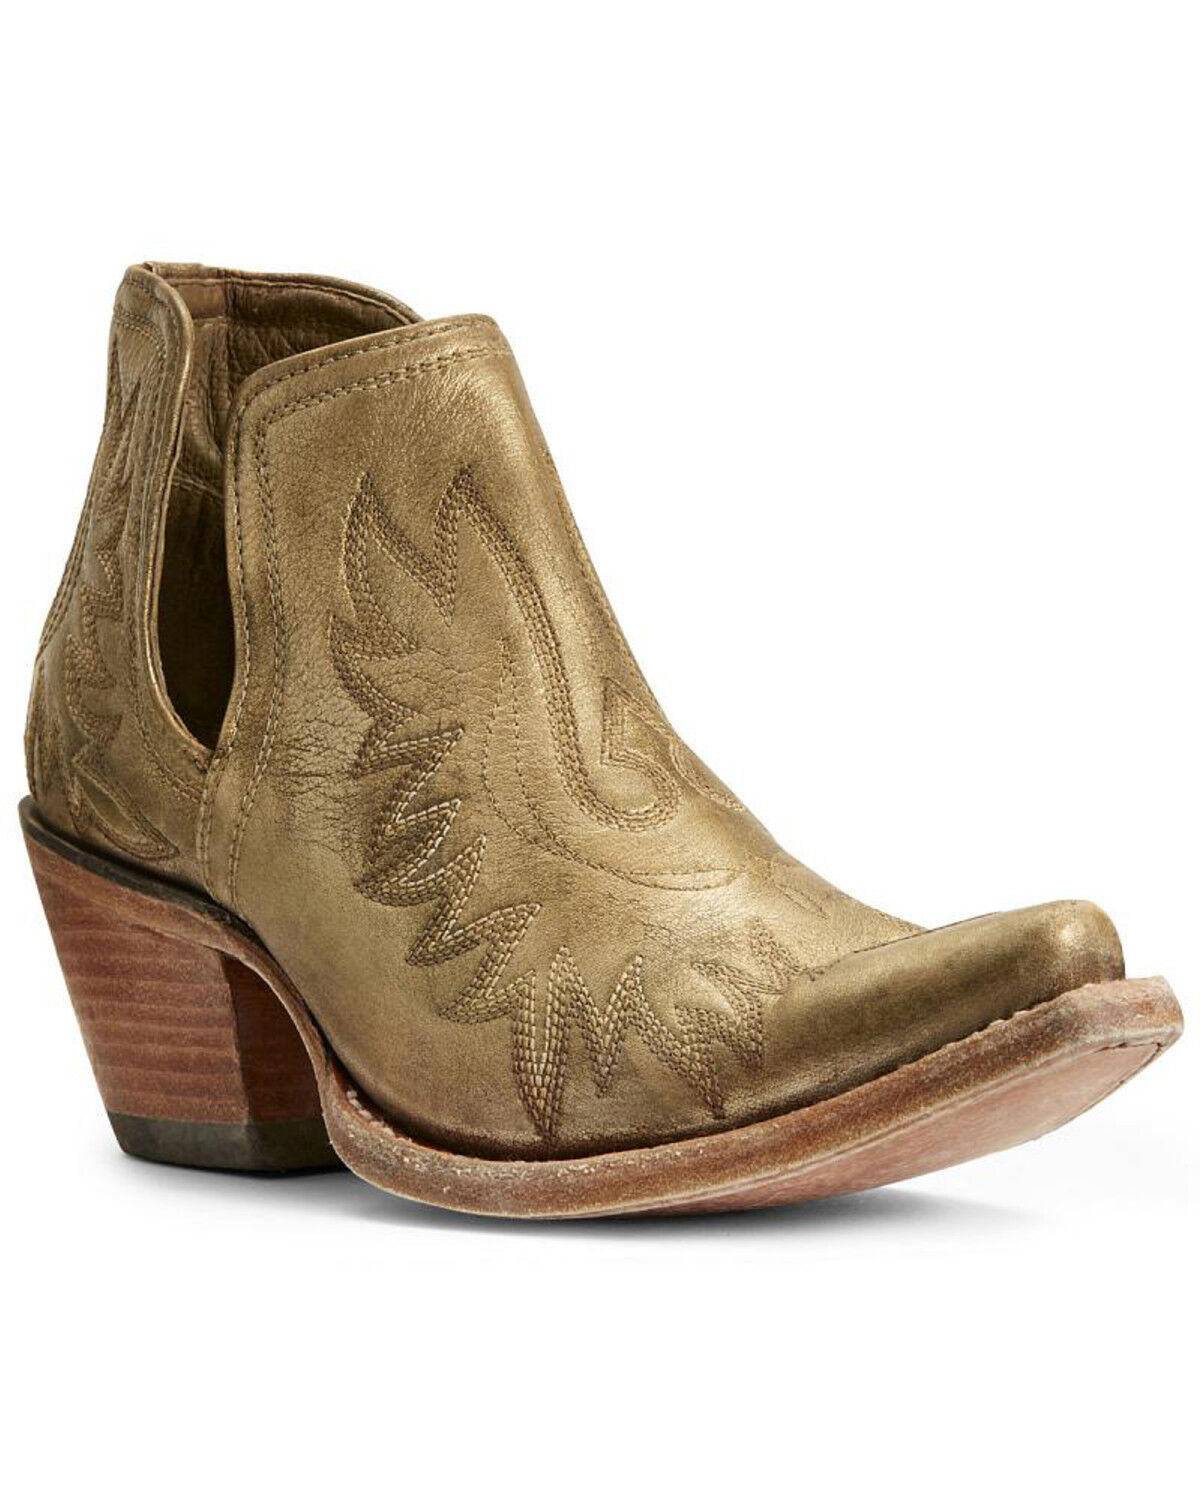 Women's Booties - Country Outfitter